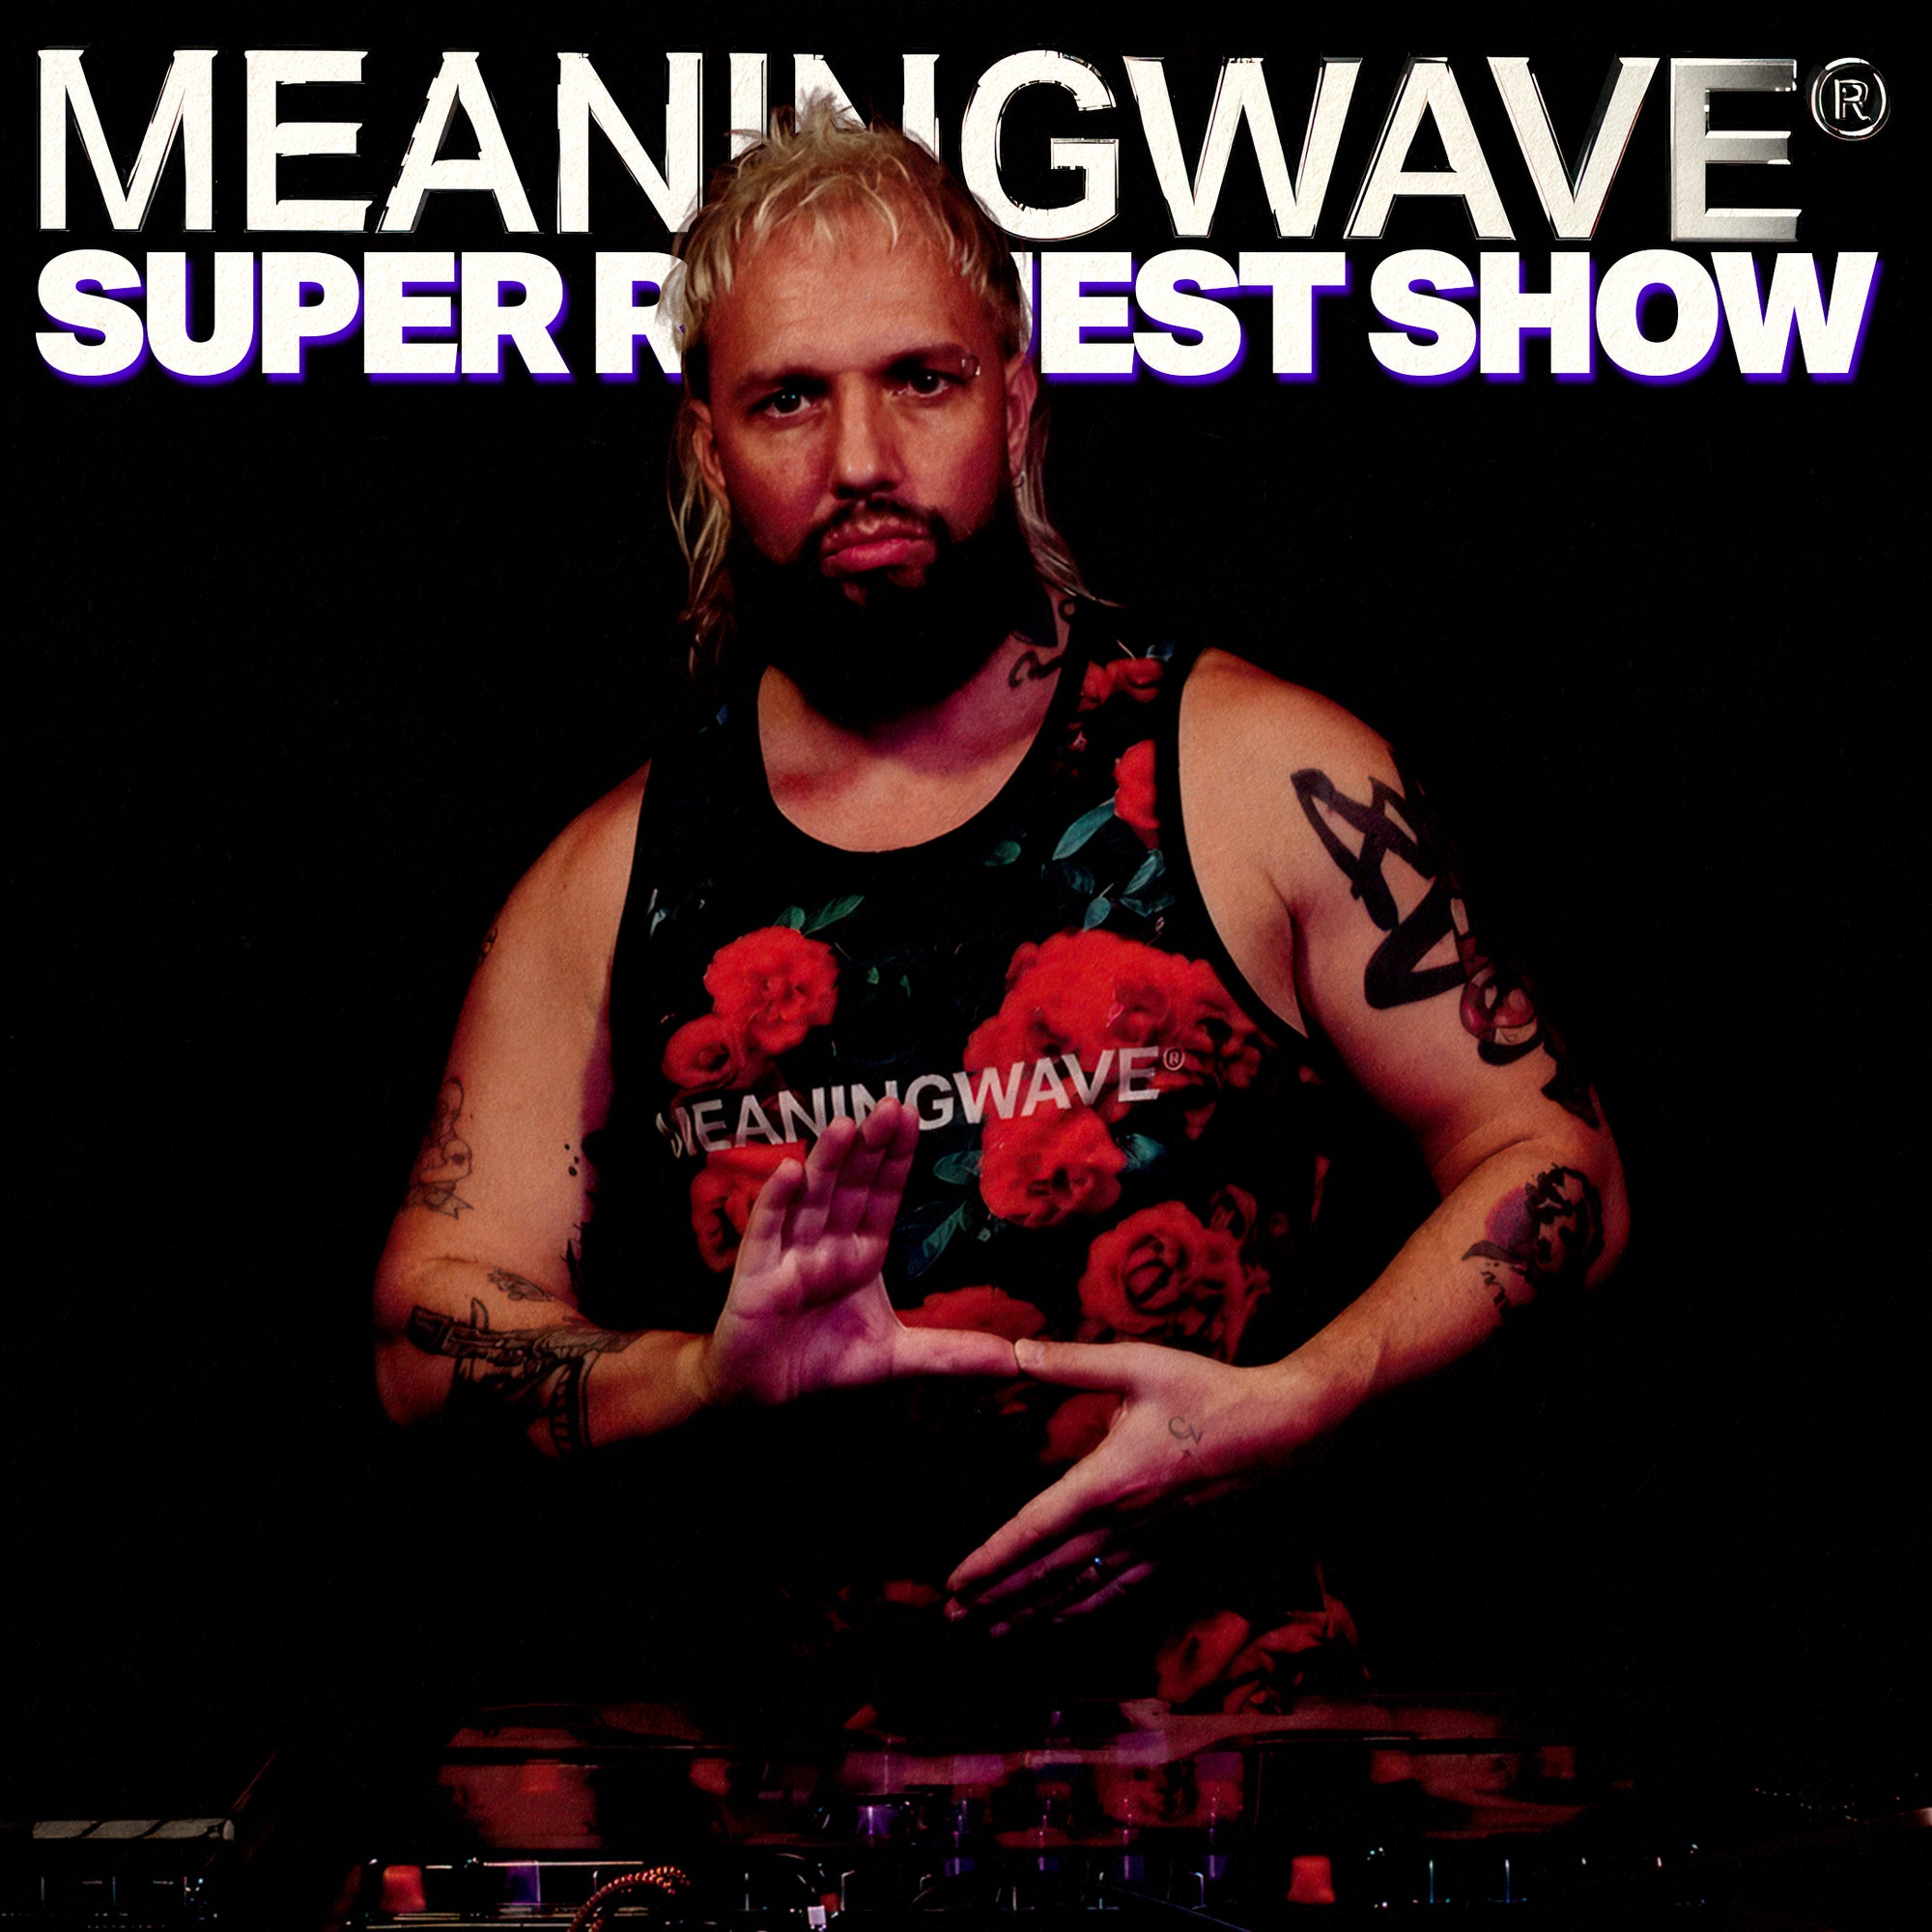 MEANINGWAVE SUPER REQUEST SHOW! | MEANINGSTREAM 474